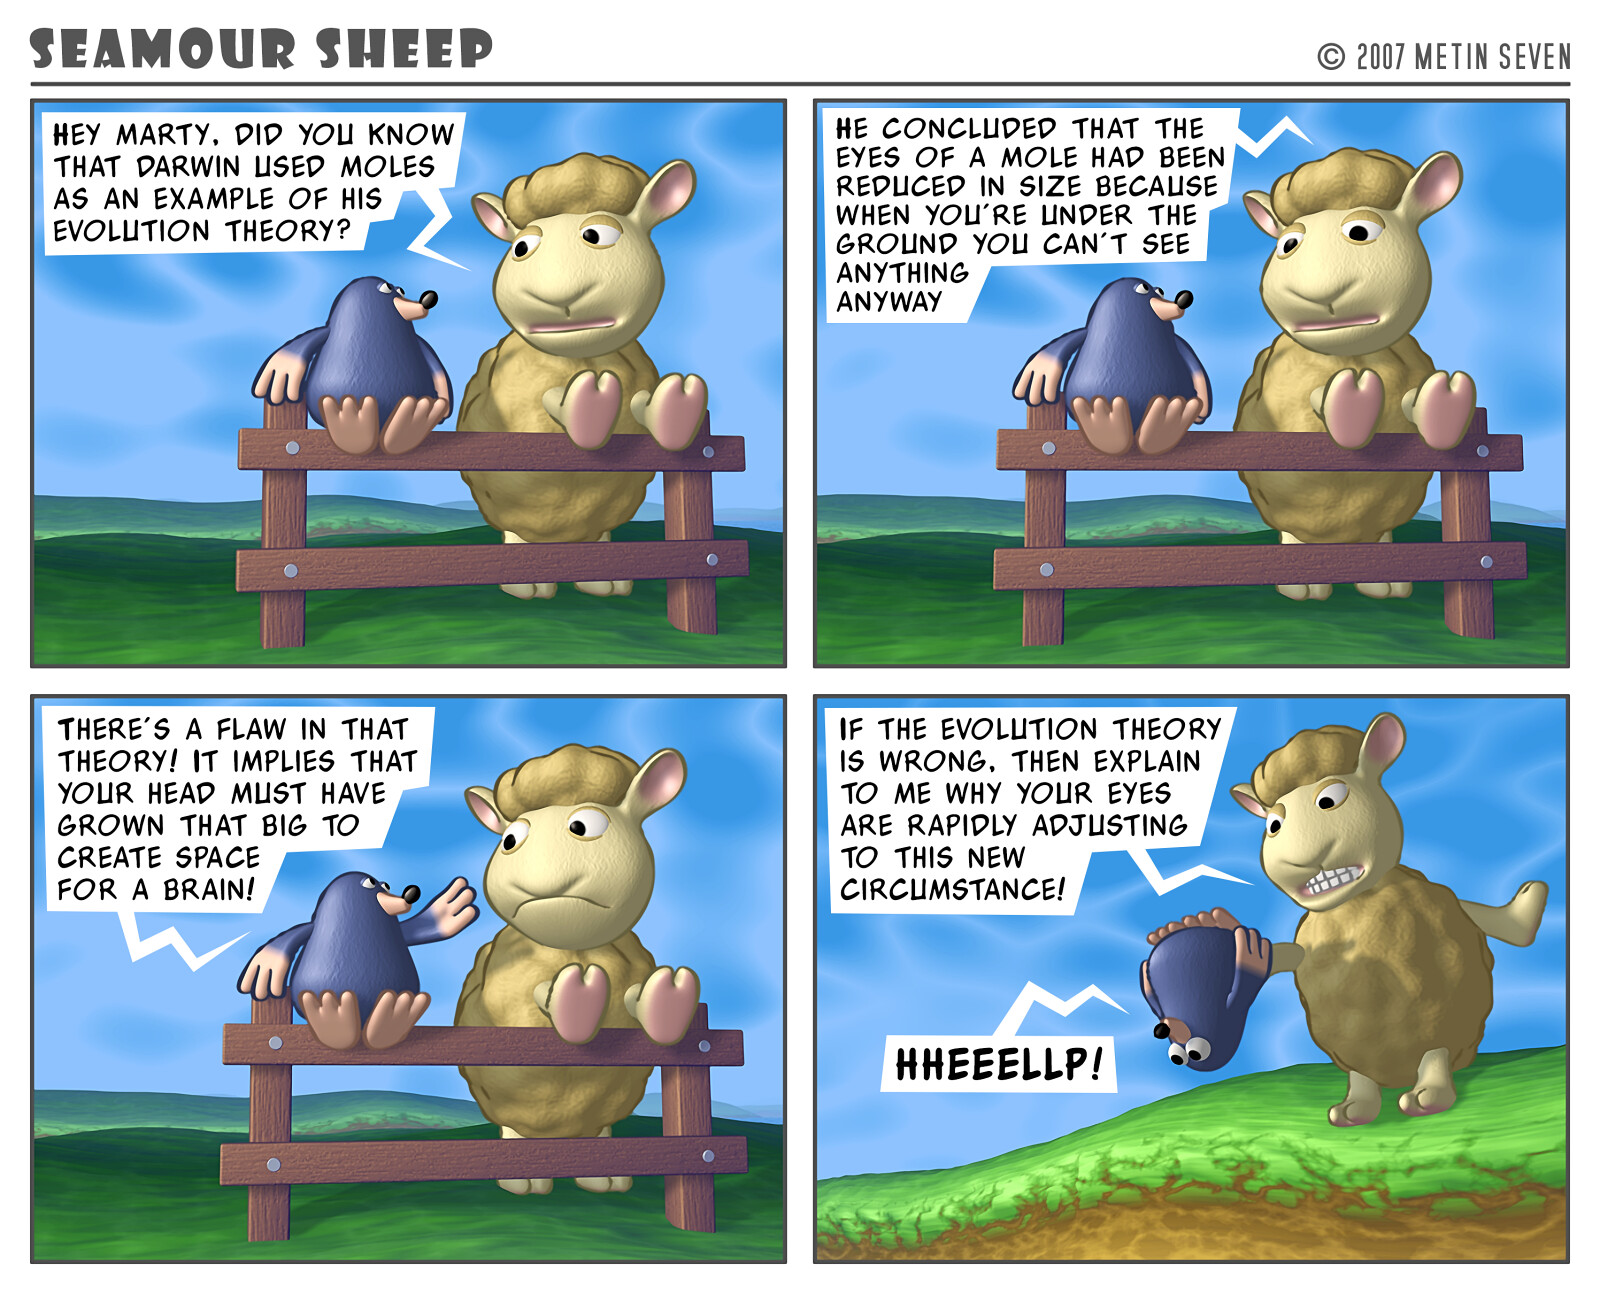 Seamour Sheep and Marty Mole comic strip episode: Evolution